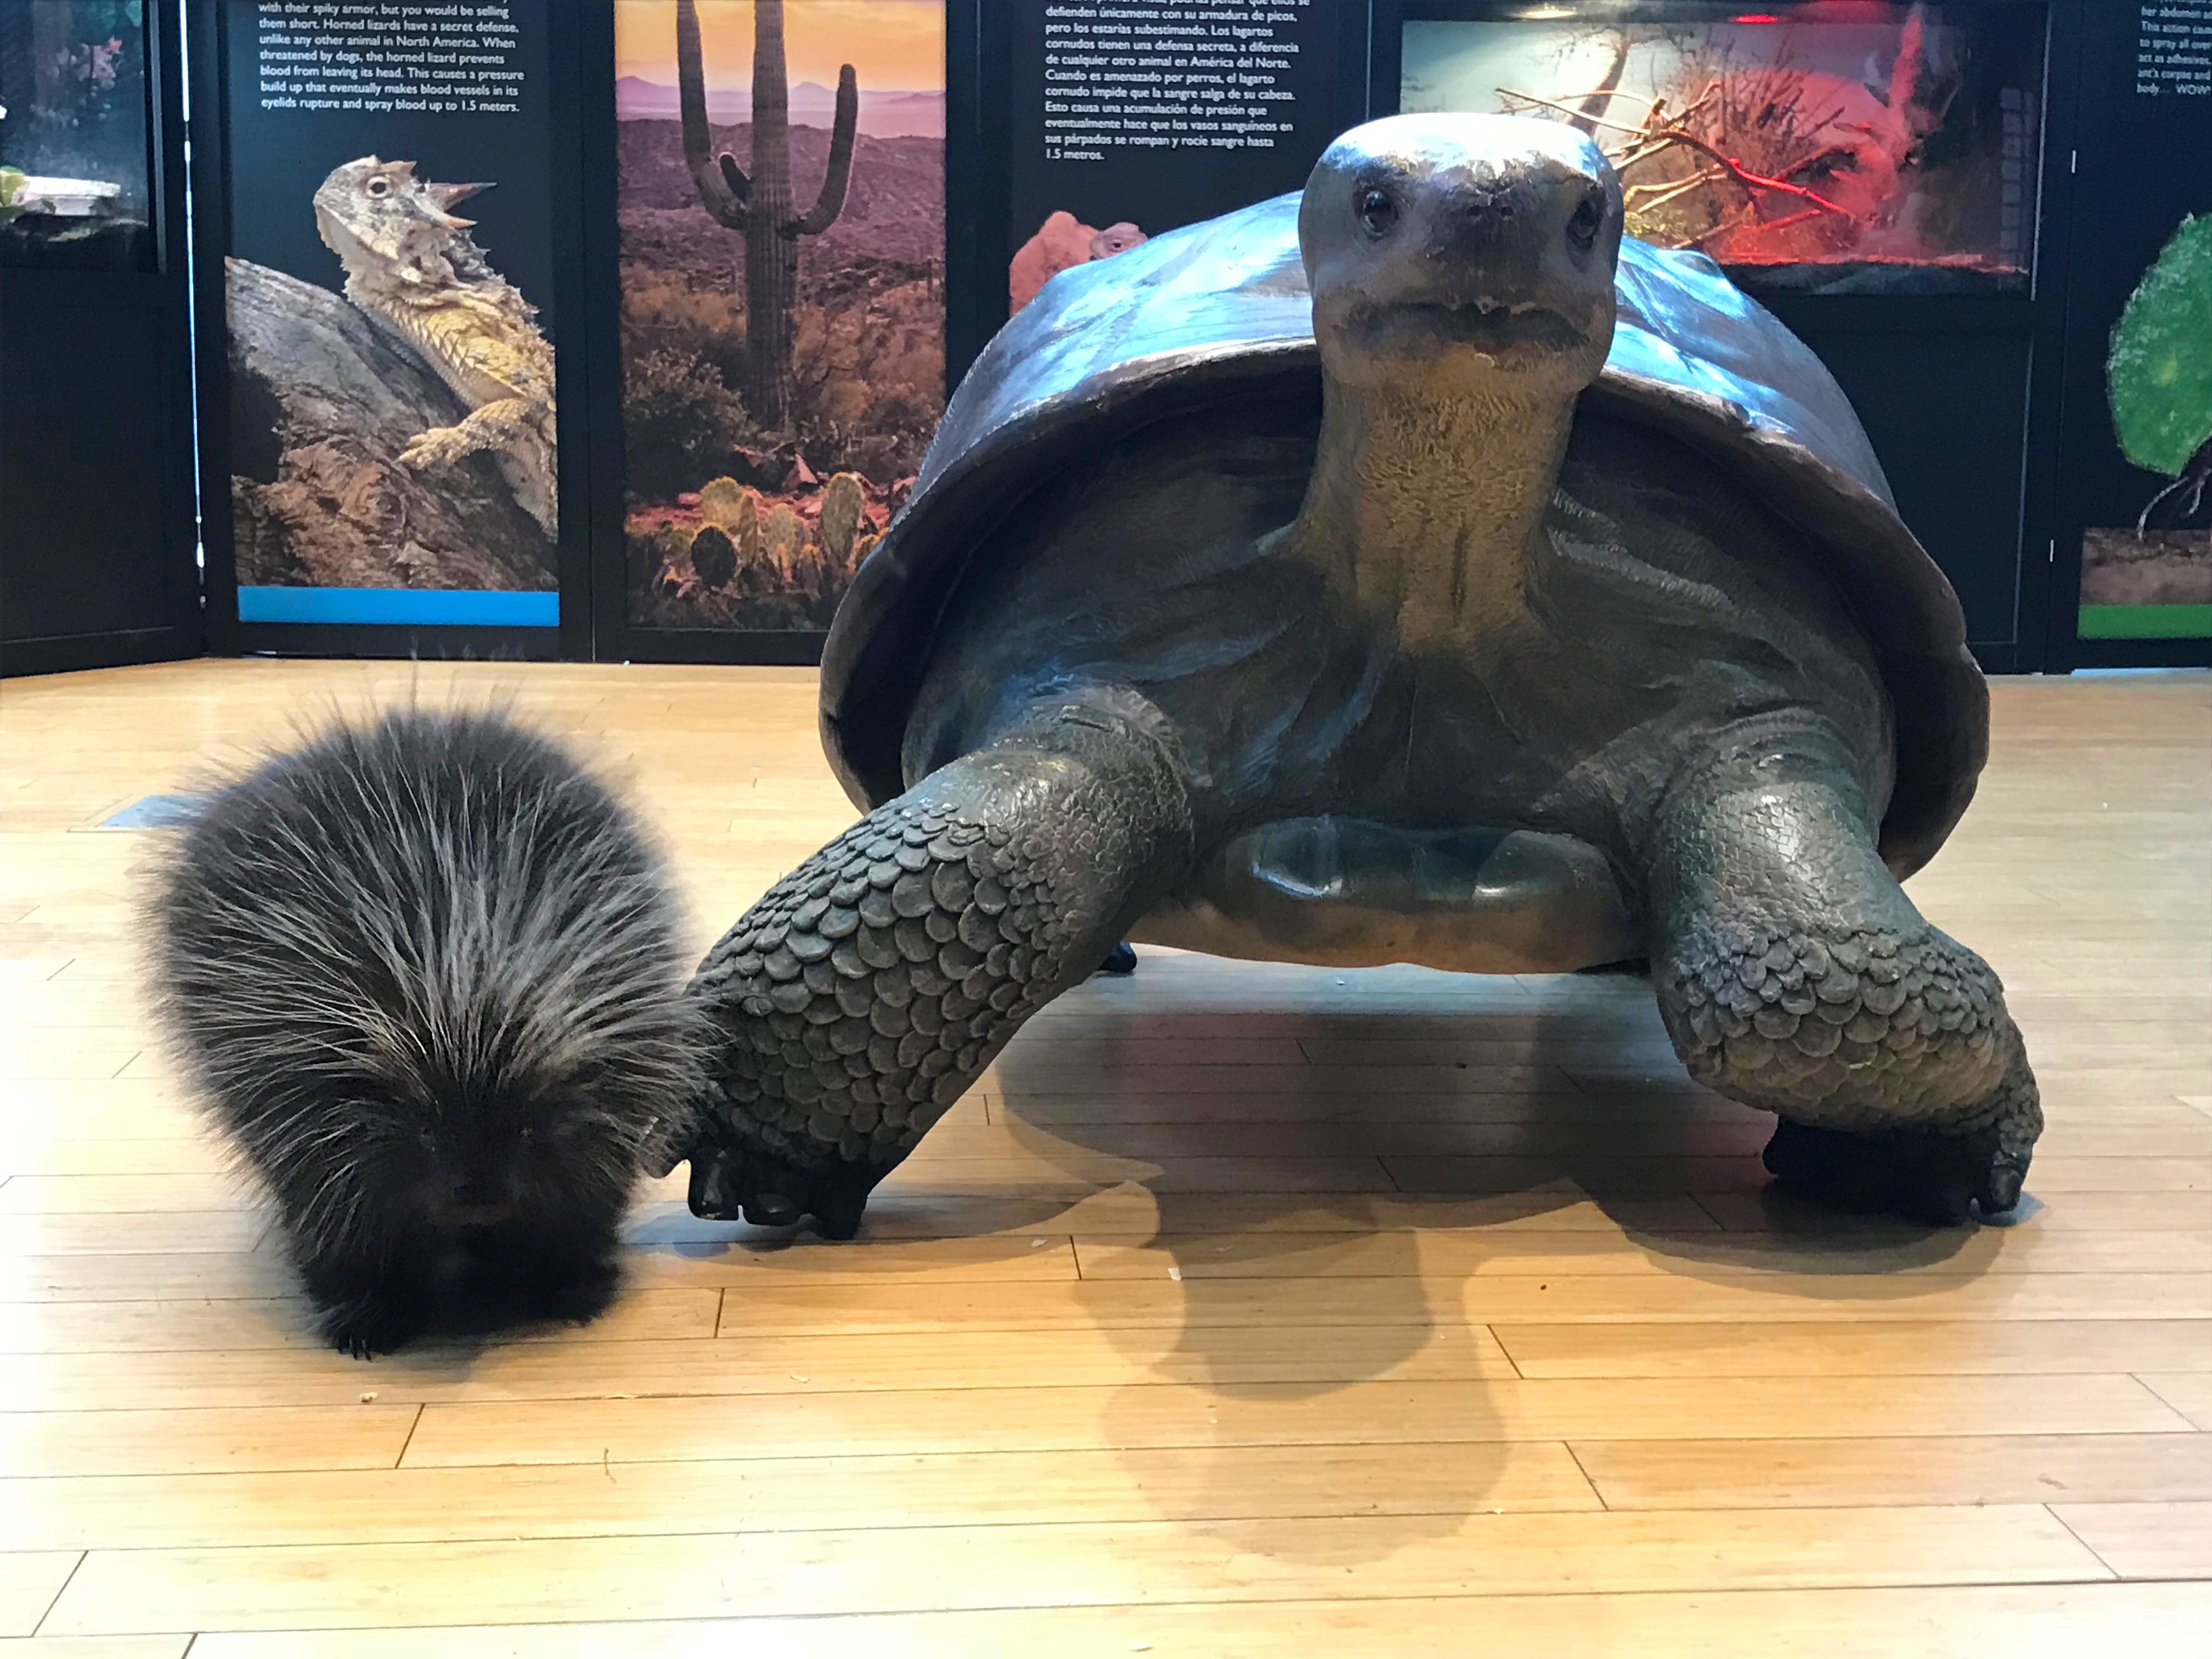 porcupine and turtle